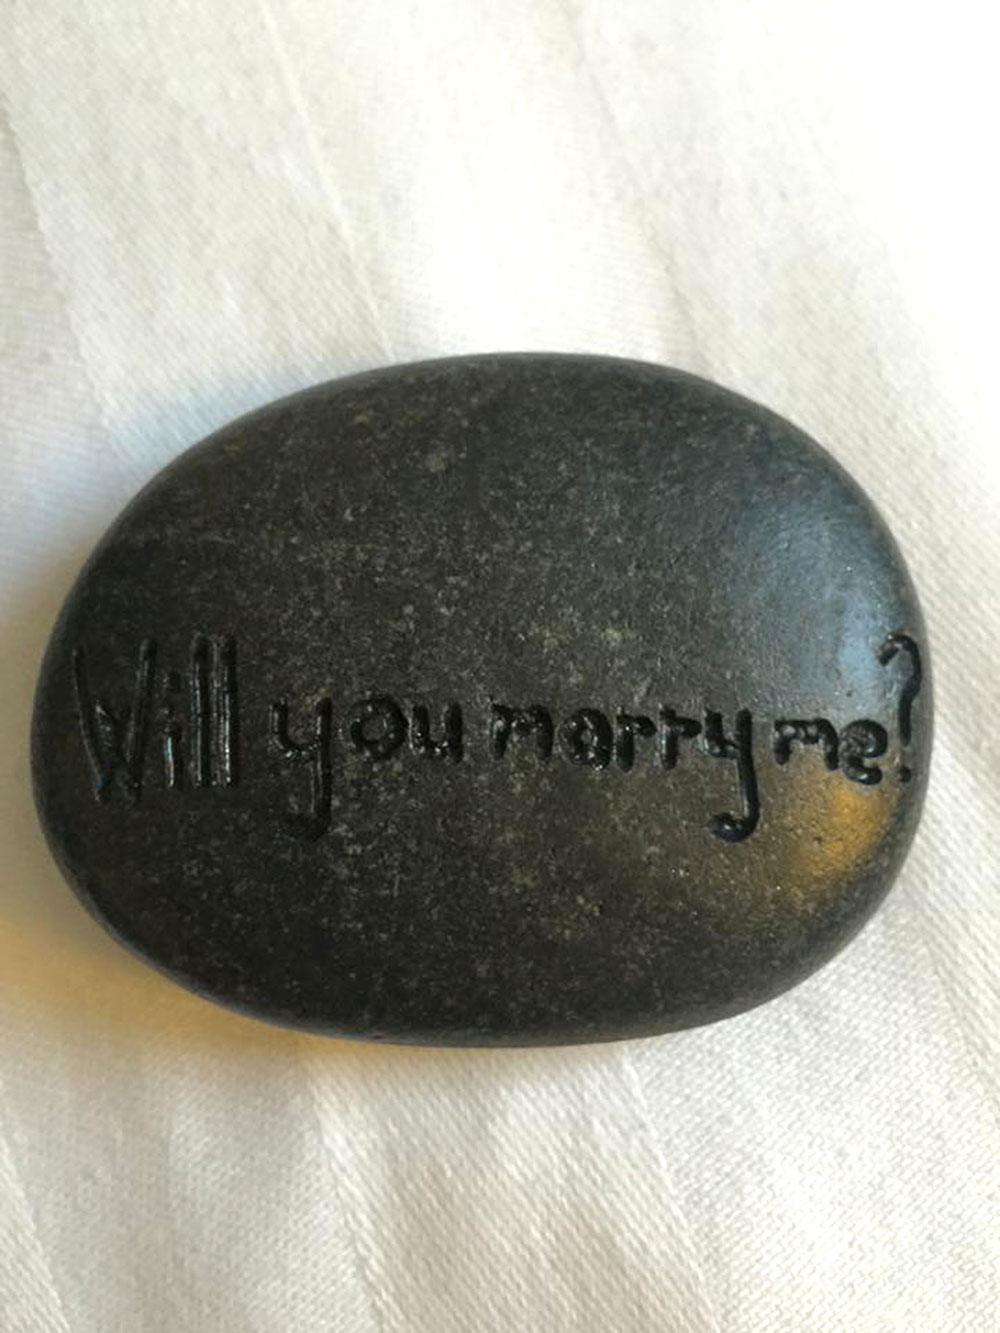 Martin presented his girlfriend with this pebble 